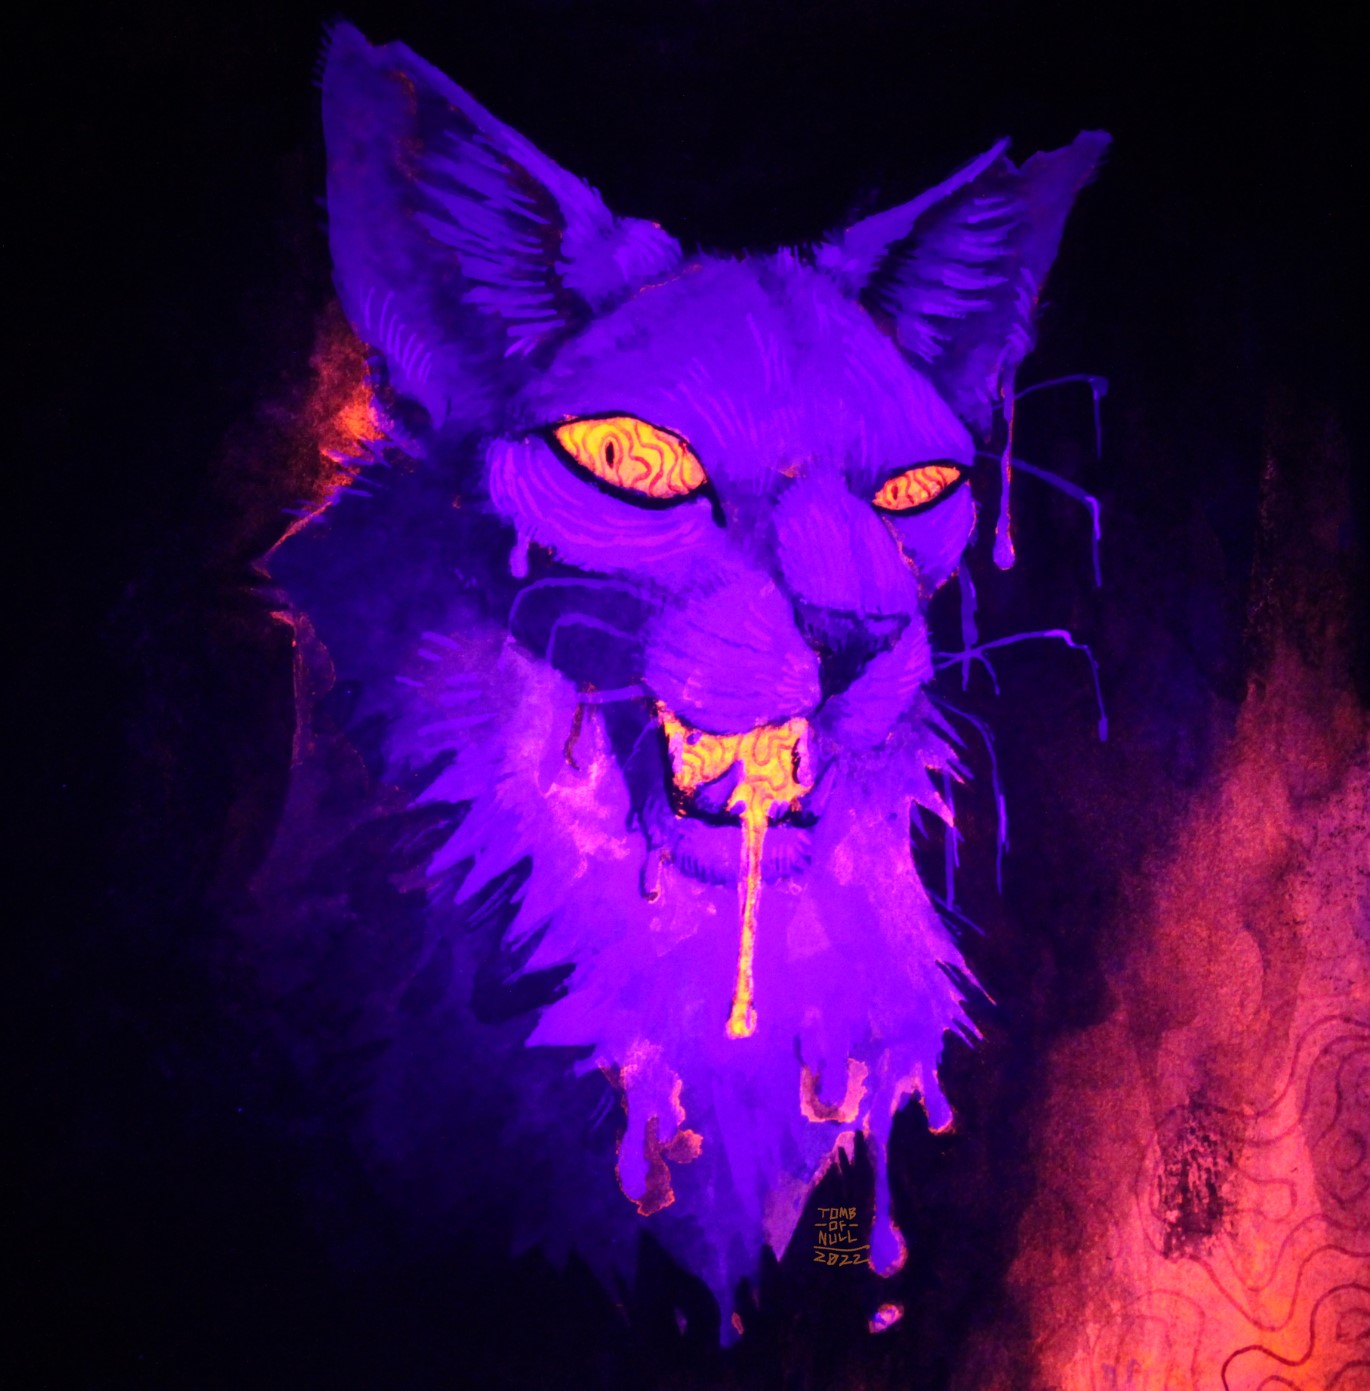 A painting of a white feline, mouth ajar and oozing like melting wax, under UV light. The lighting makes their fur appear a deep purple, and the orange of their eyes, mouth, and parts of the background glow a bright orange.